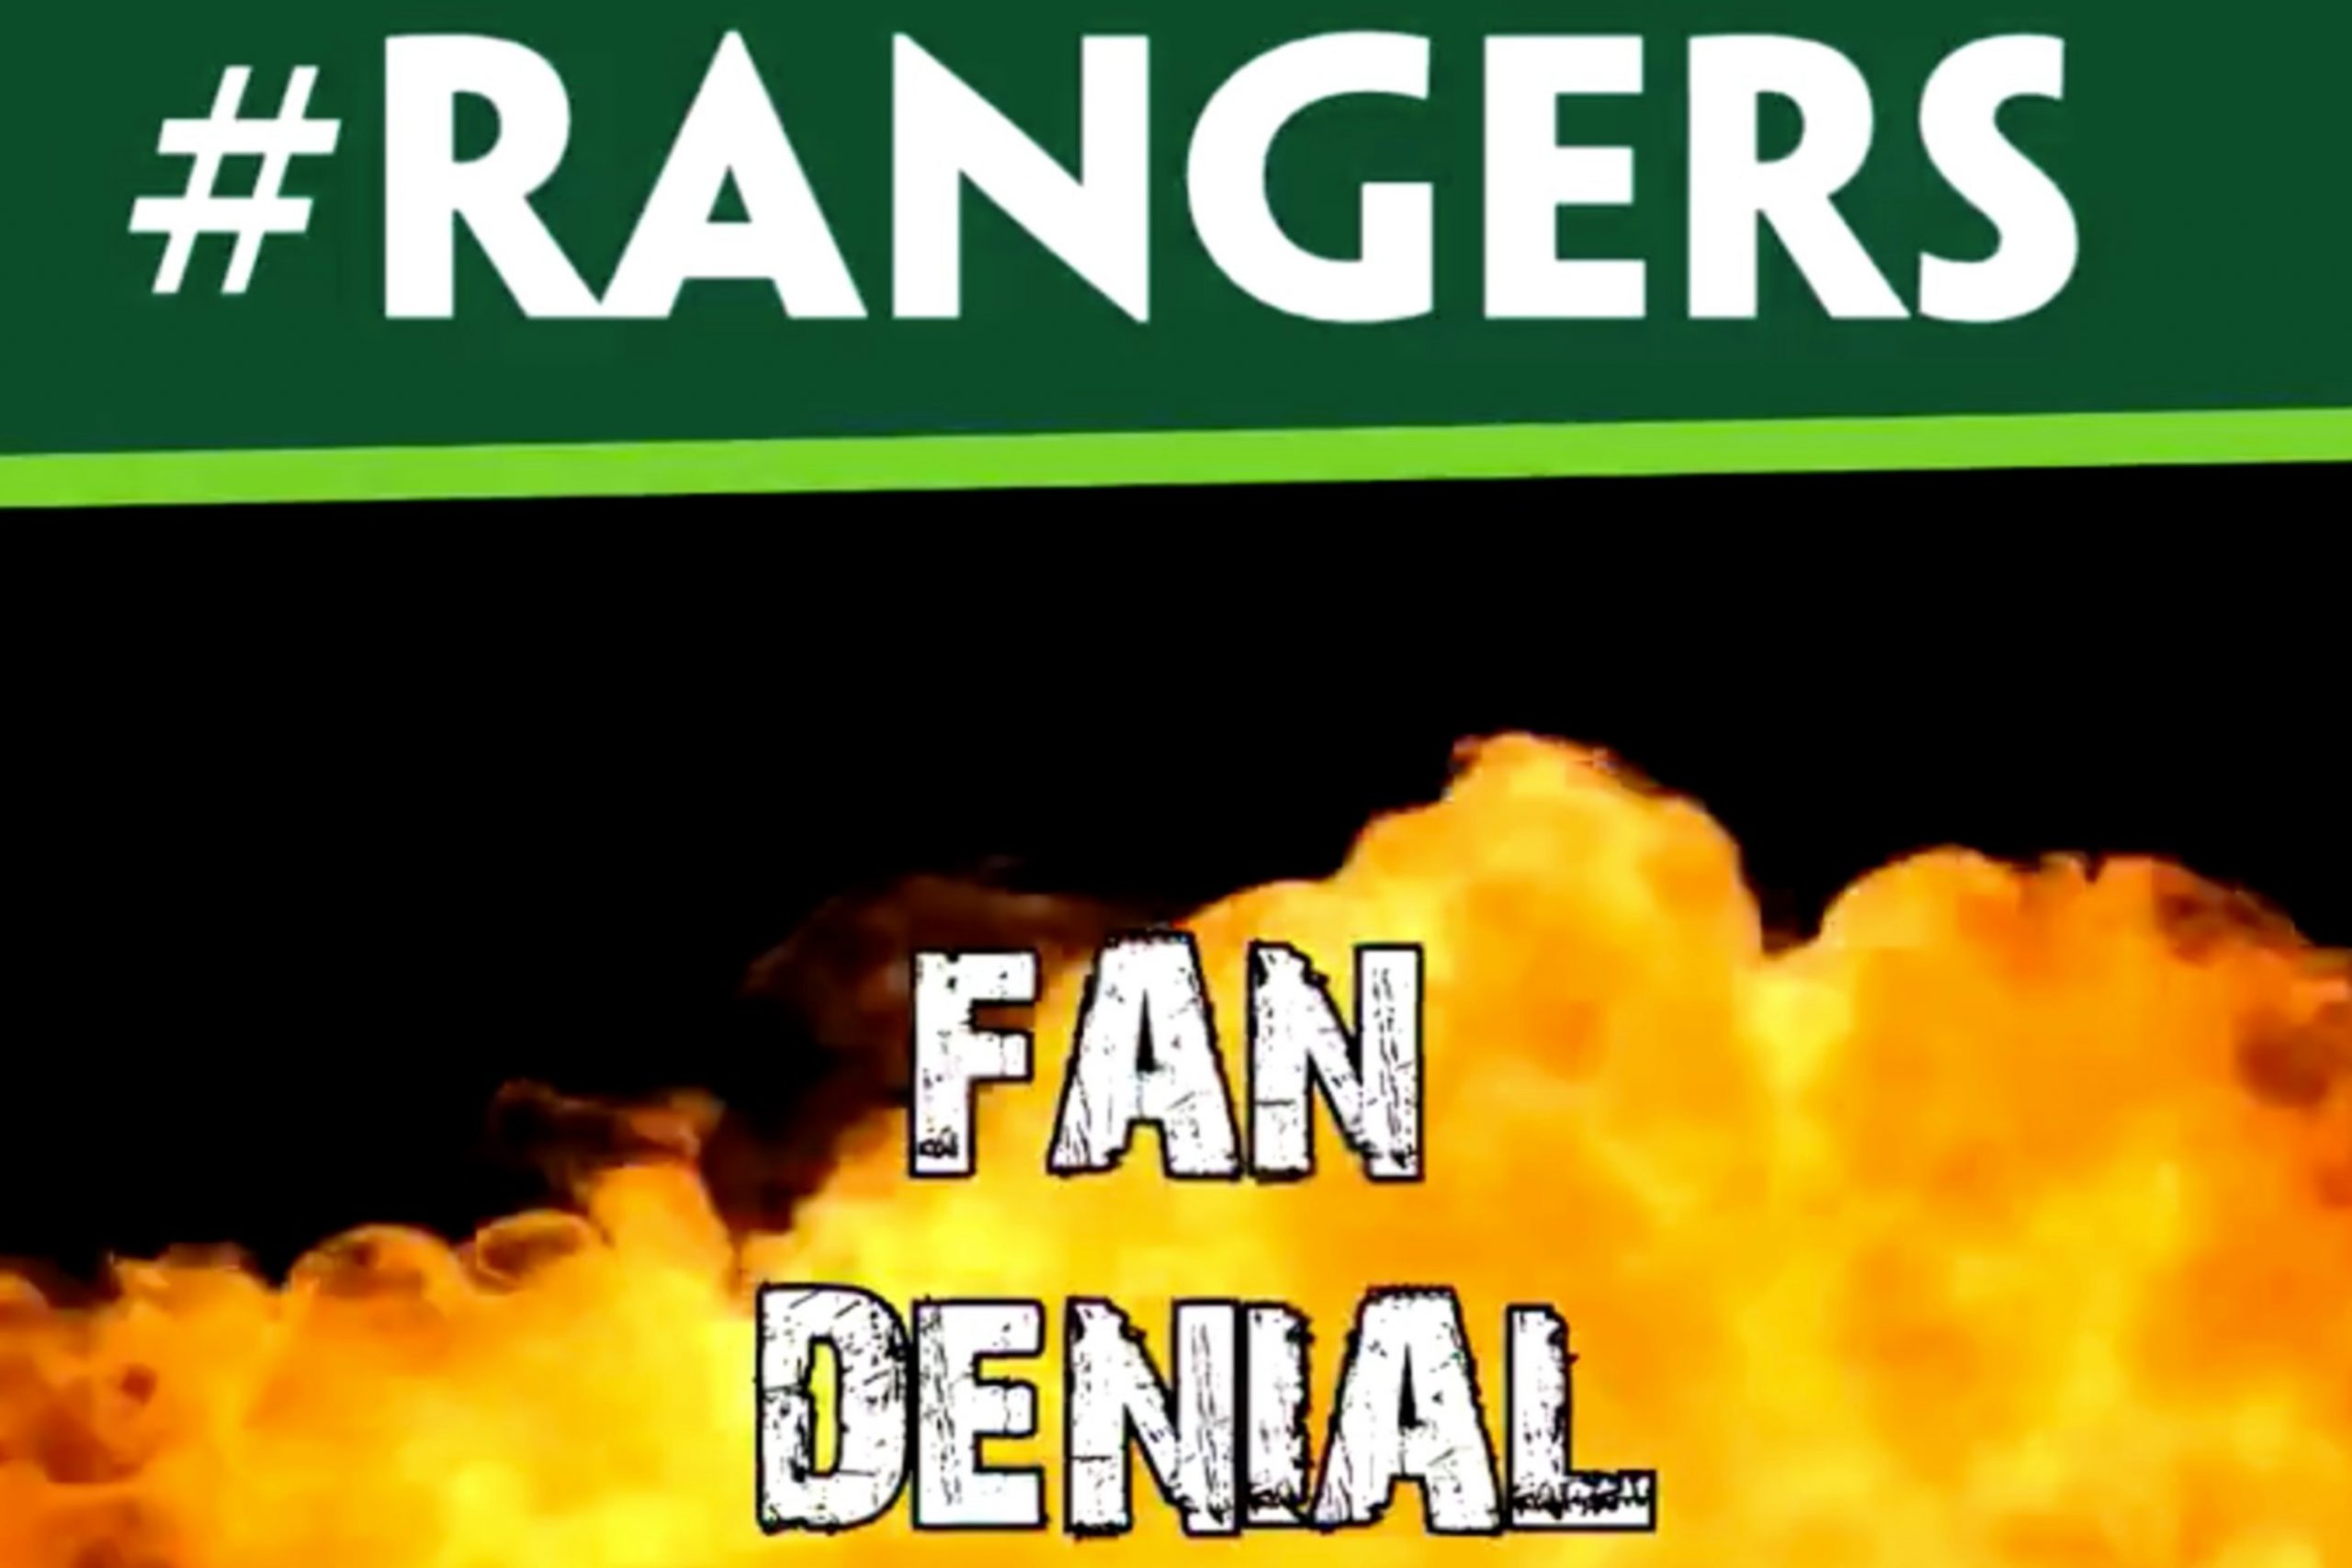 Paddy Power video taking the piss out of Rangers has gone viral among Celtic fans